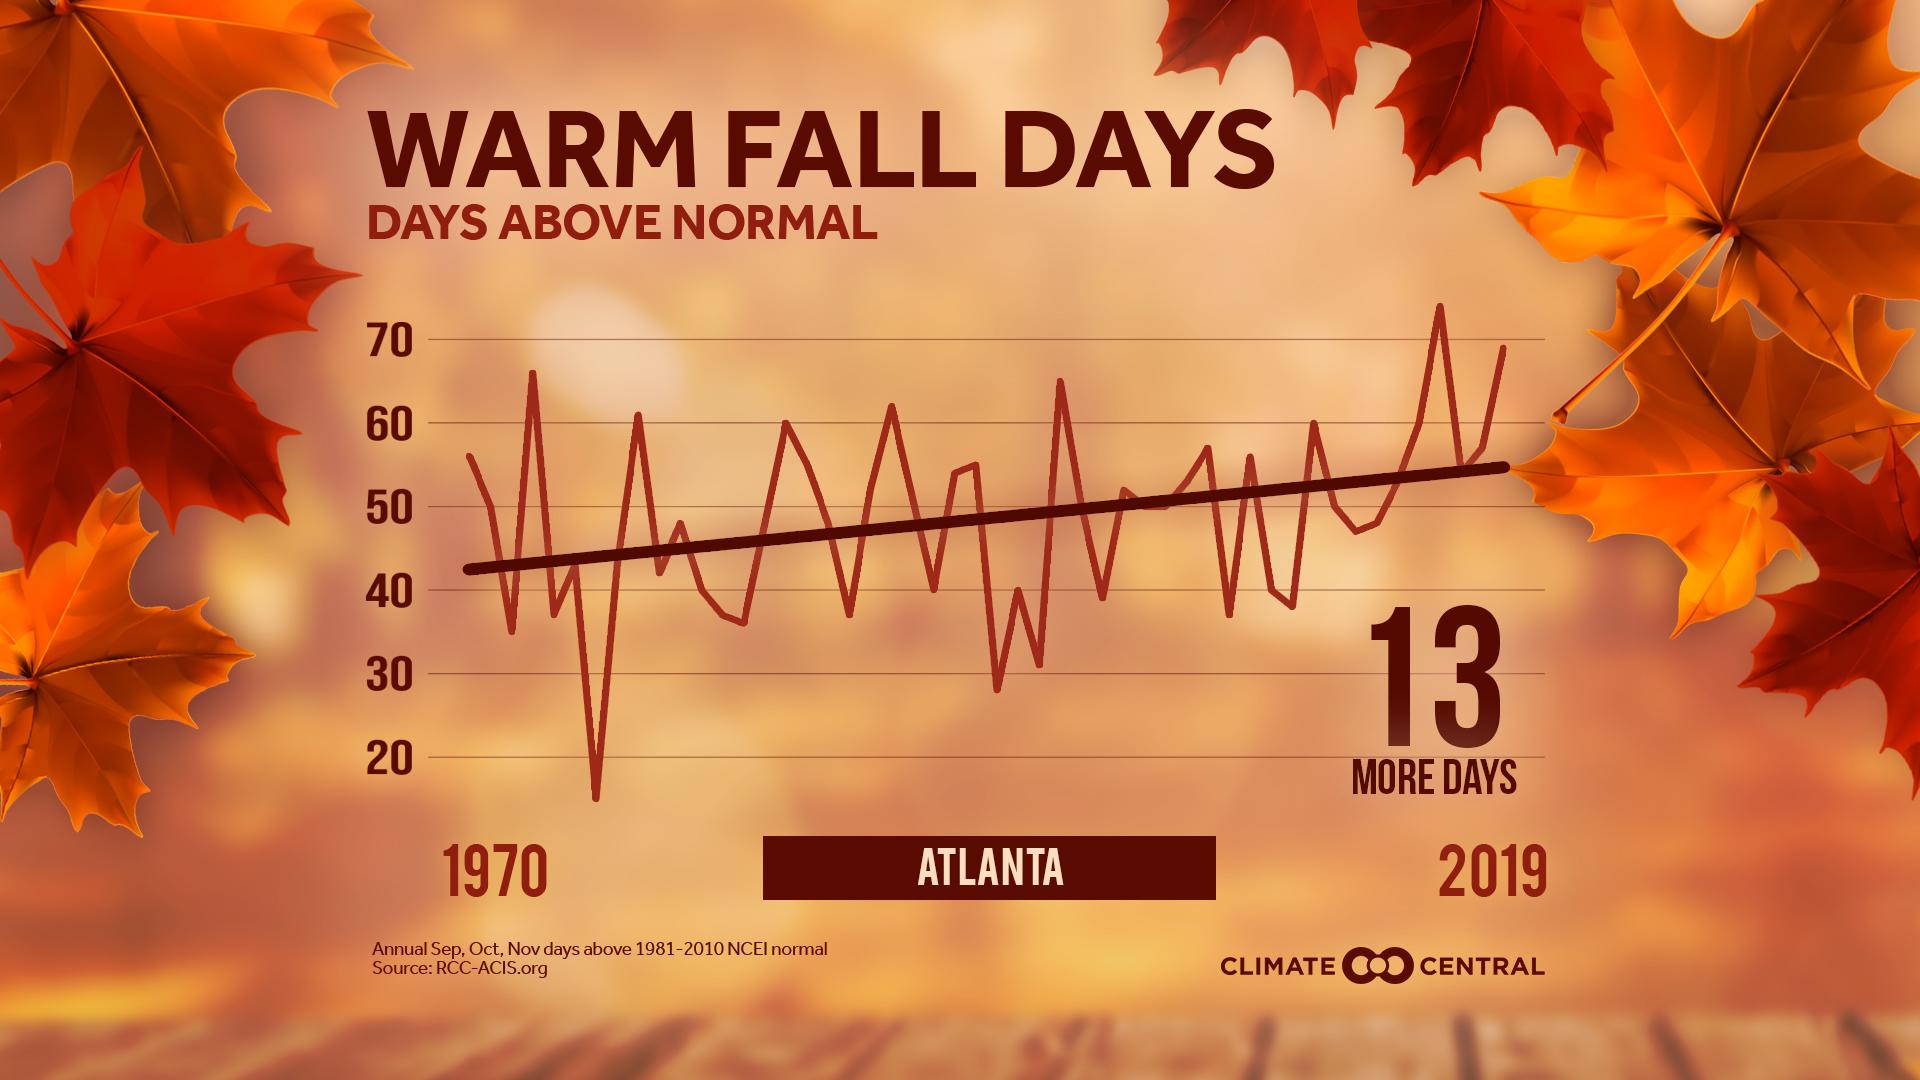 Fall Days Above Normal - Fall Trends